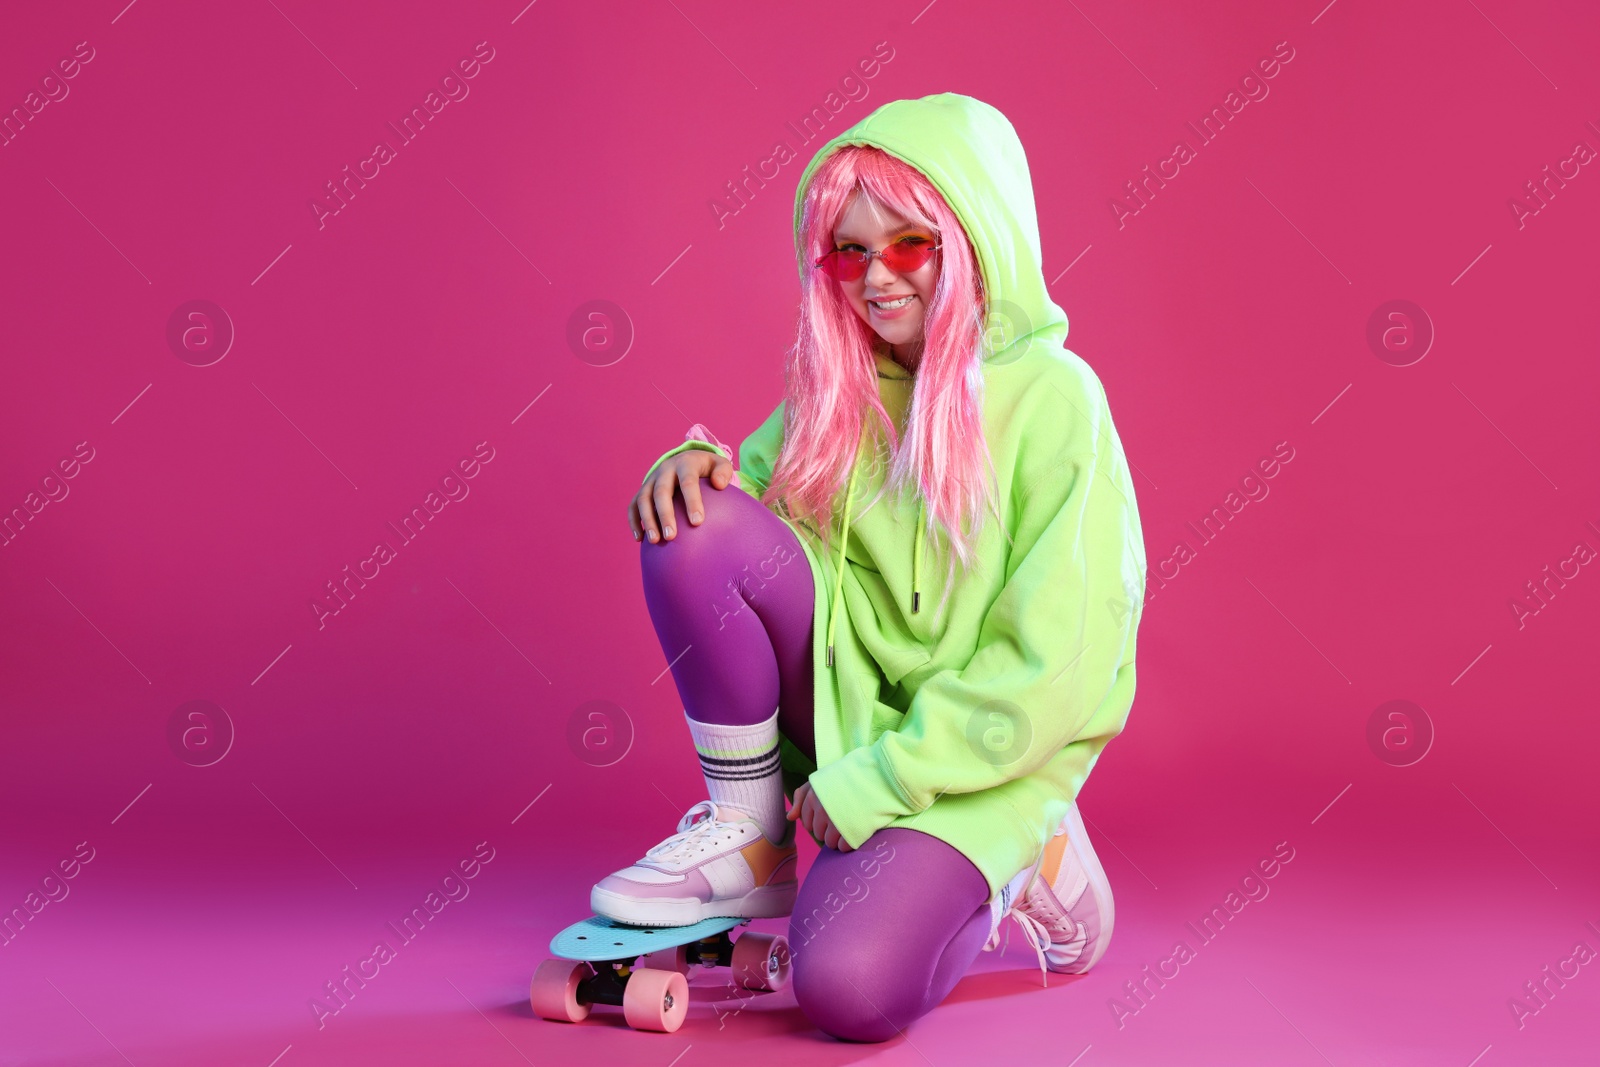 Photo of Cute indie girl with sunglasses and penny board on violet background